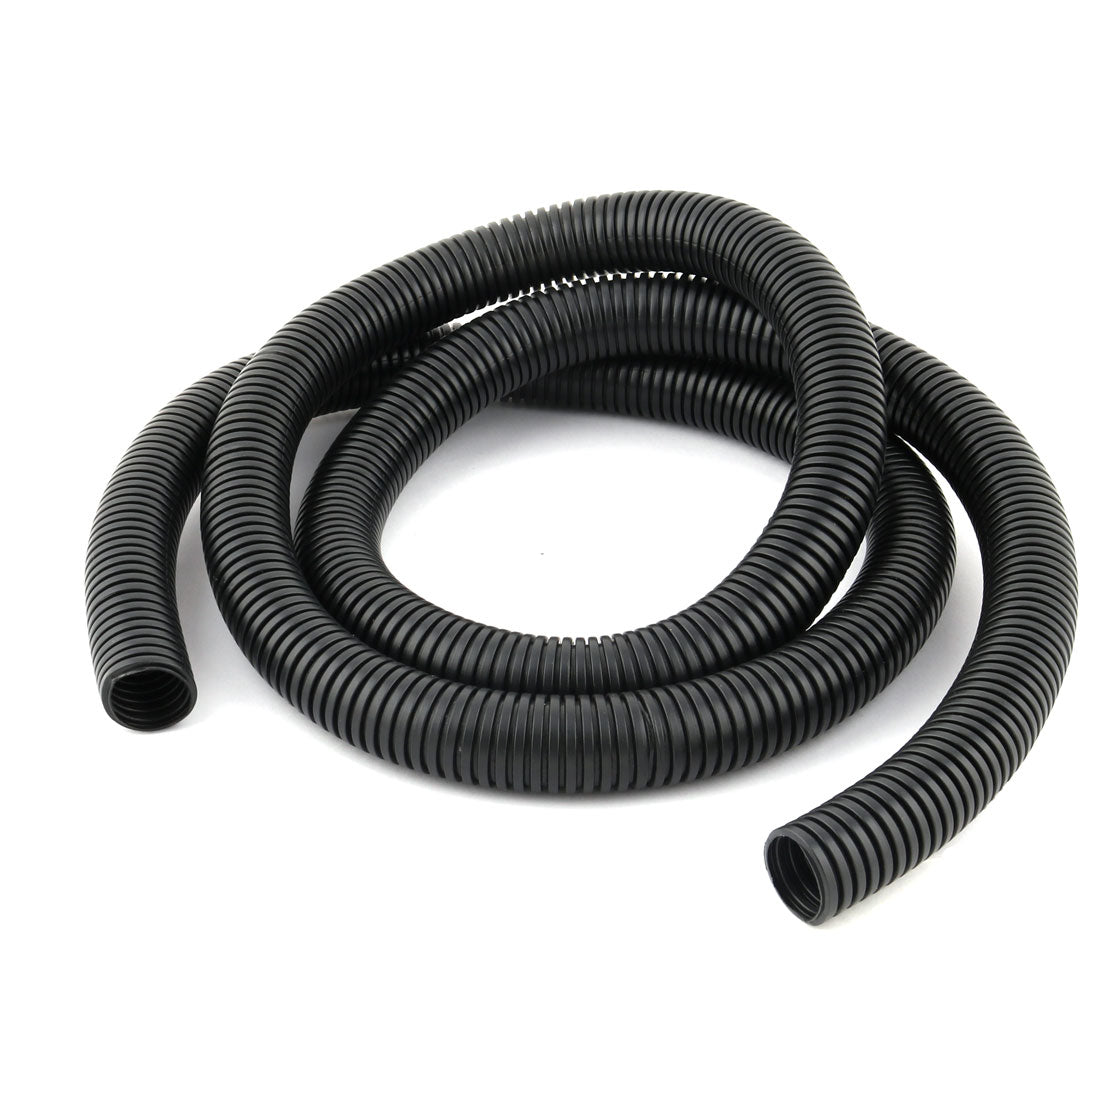 uxcell Uxcell 2 M 24 x 28 mm PVC Flexible Corrugated Conduit Tube for Garden,Office Black